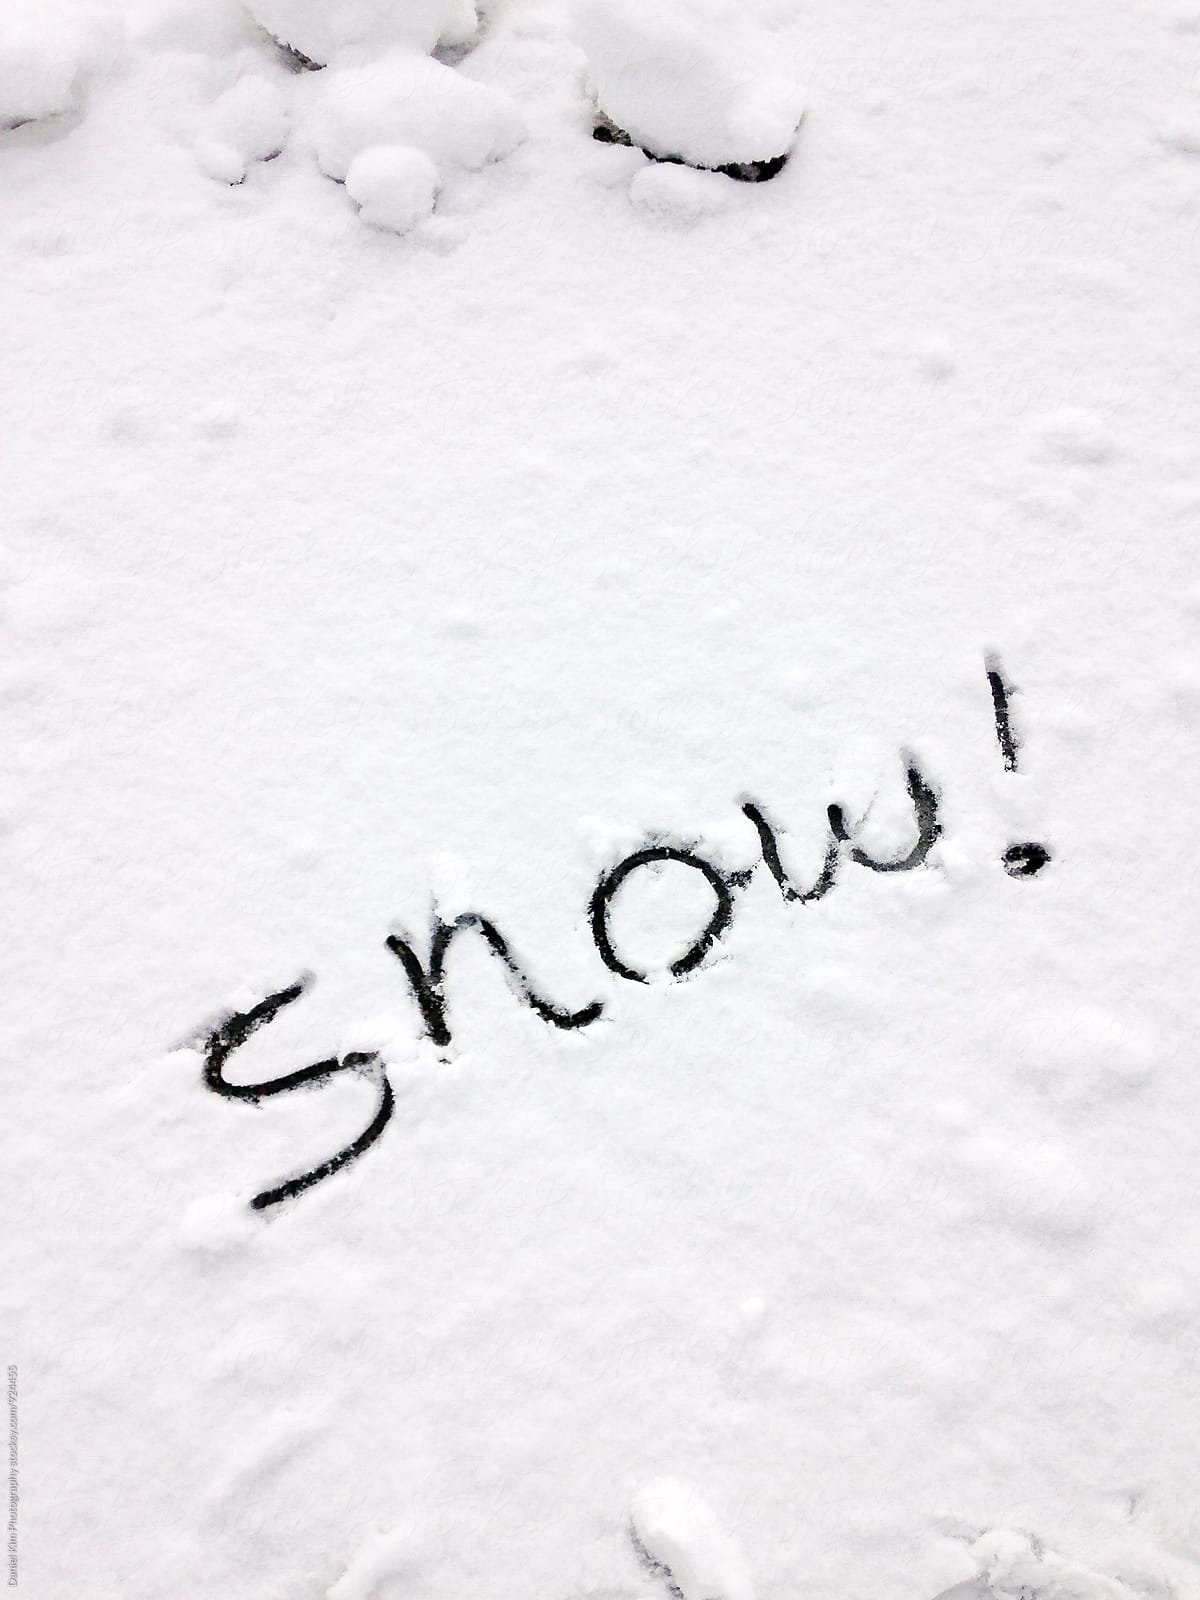 The word snow written in snow